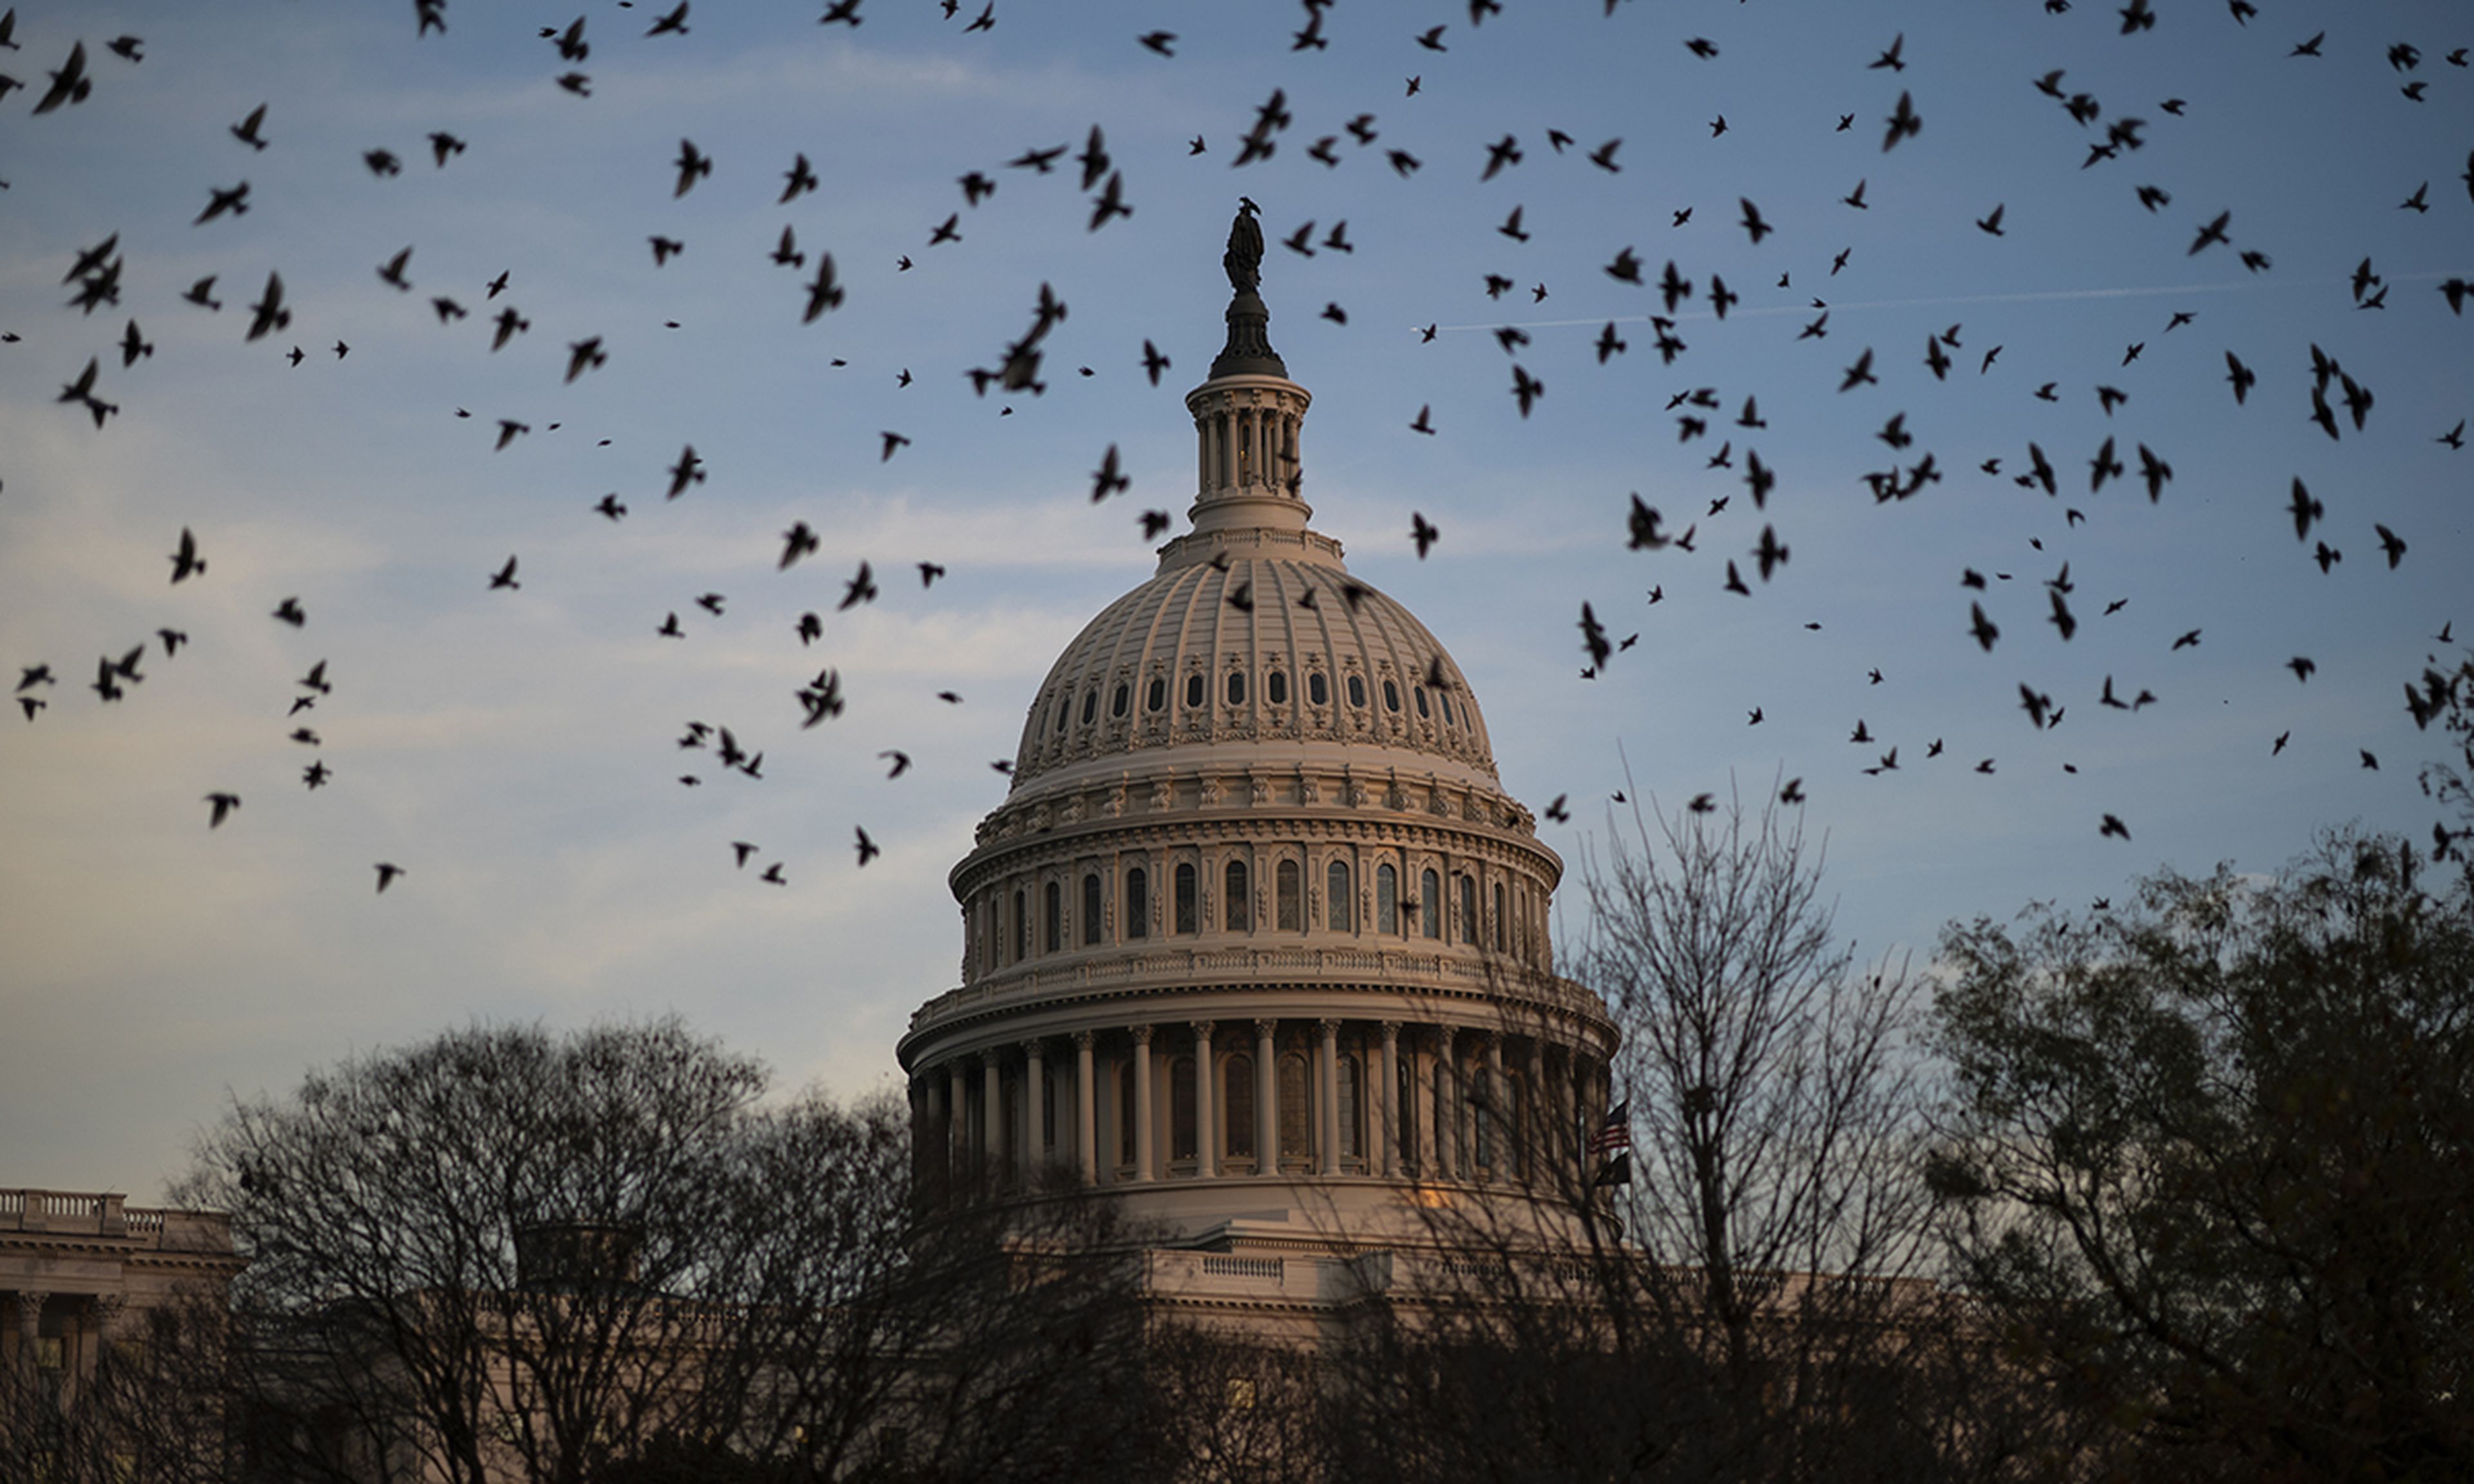 A flock of birds flies near the U.S. Capitol at dusk on Dec. 2, 2021, in Washington. The House passed the annual National Defense Authorization Act in a 360-40 vote on Tuesday. (Photo by Drew Angerer/Getty Images)